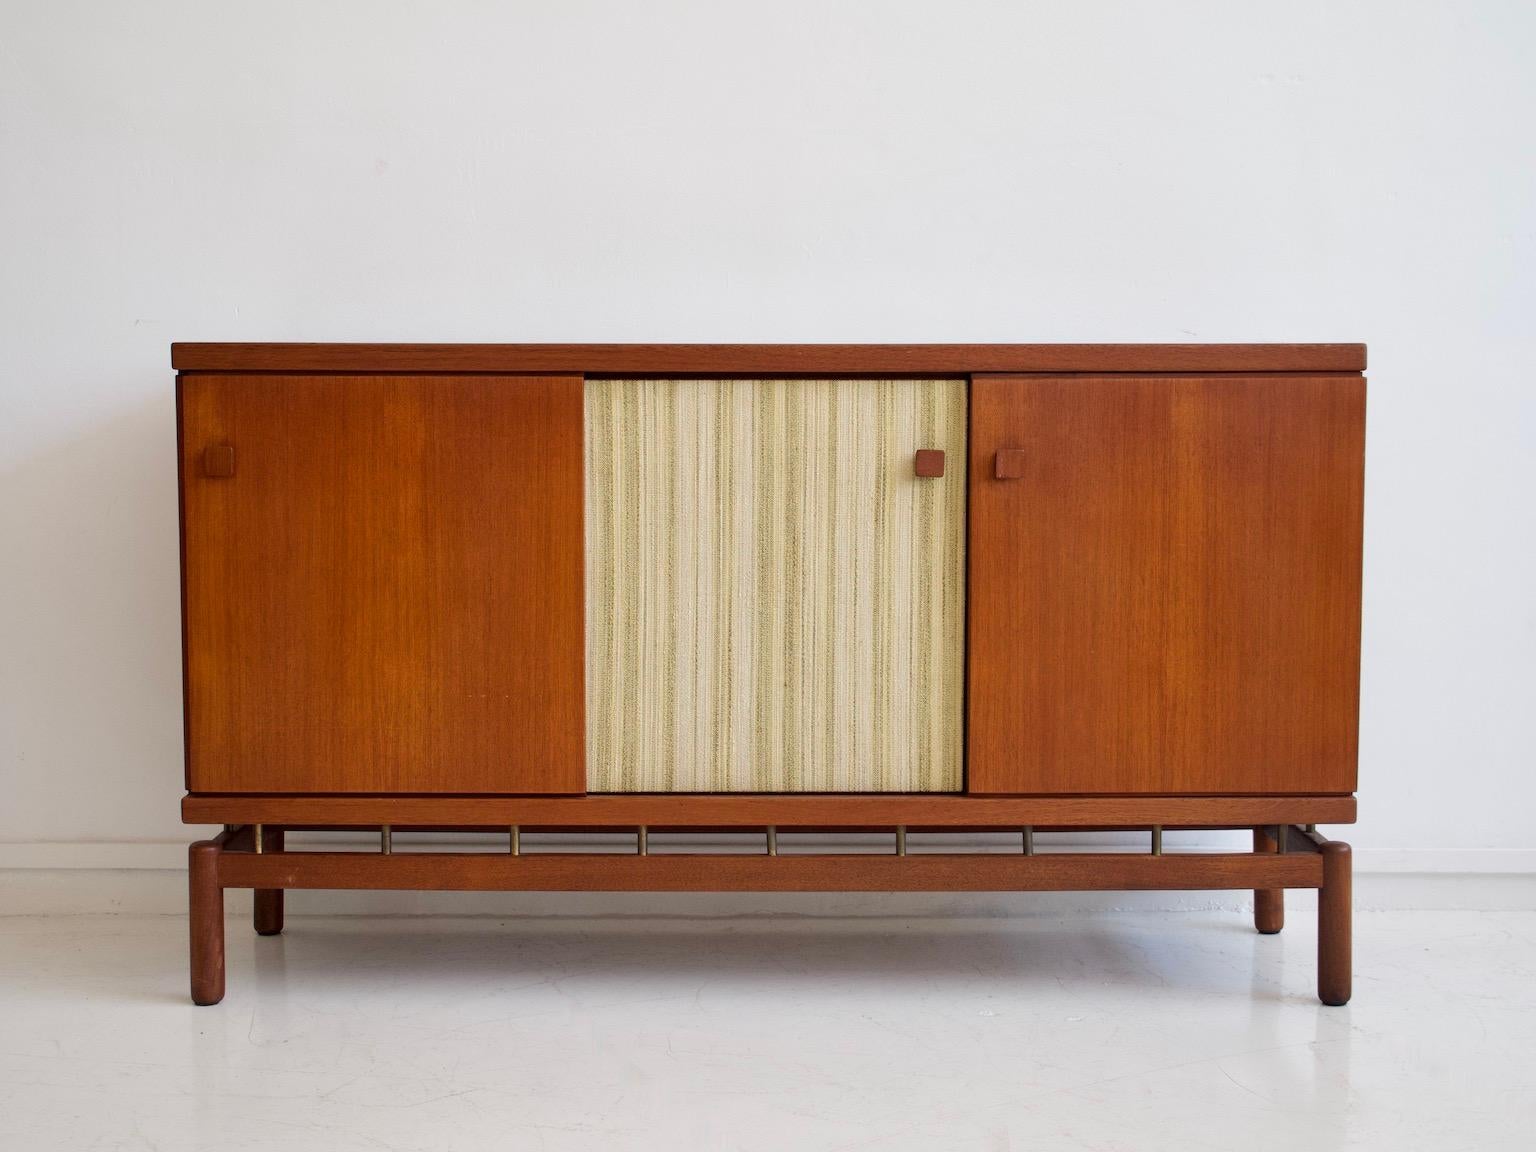 Sideboard made of teak wood with brass details. Sliding doors, one of them decorated with fabric. Produced by La Permanente Mobili Cantù and designed by Finnish interior architect Ilmari Tapiovaara.

Literature: Selettiva Cantù Catalog.